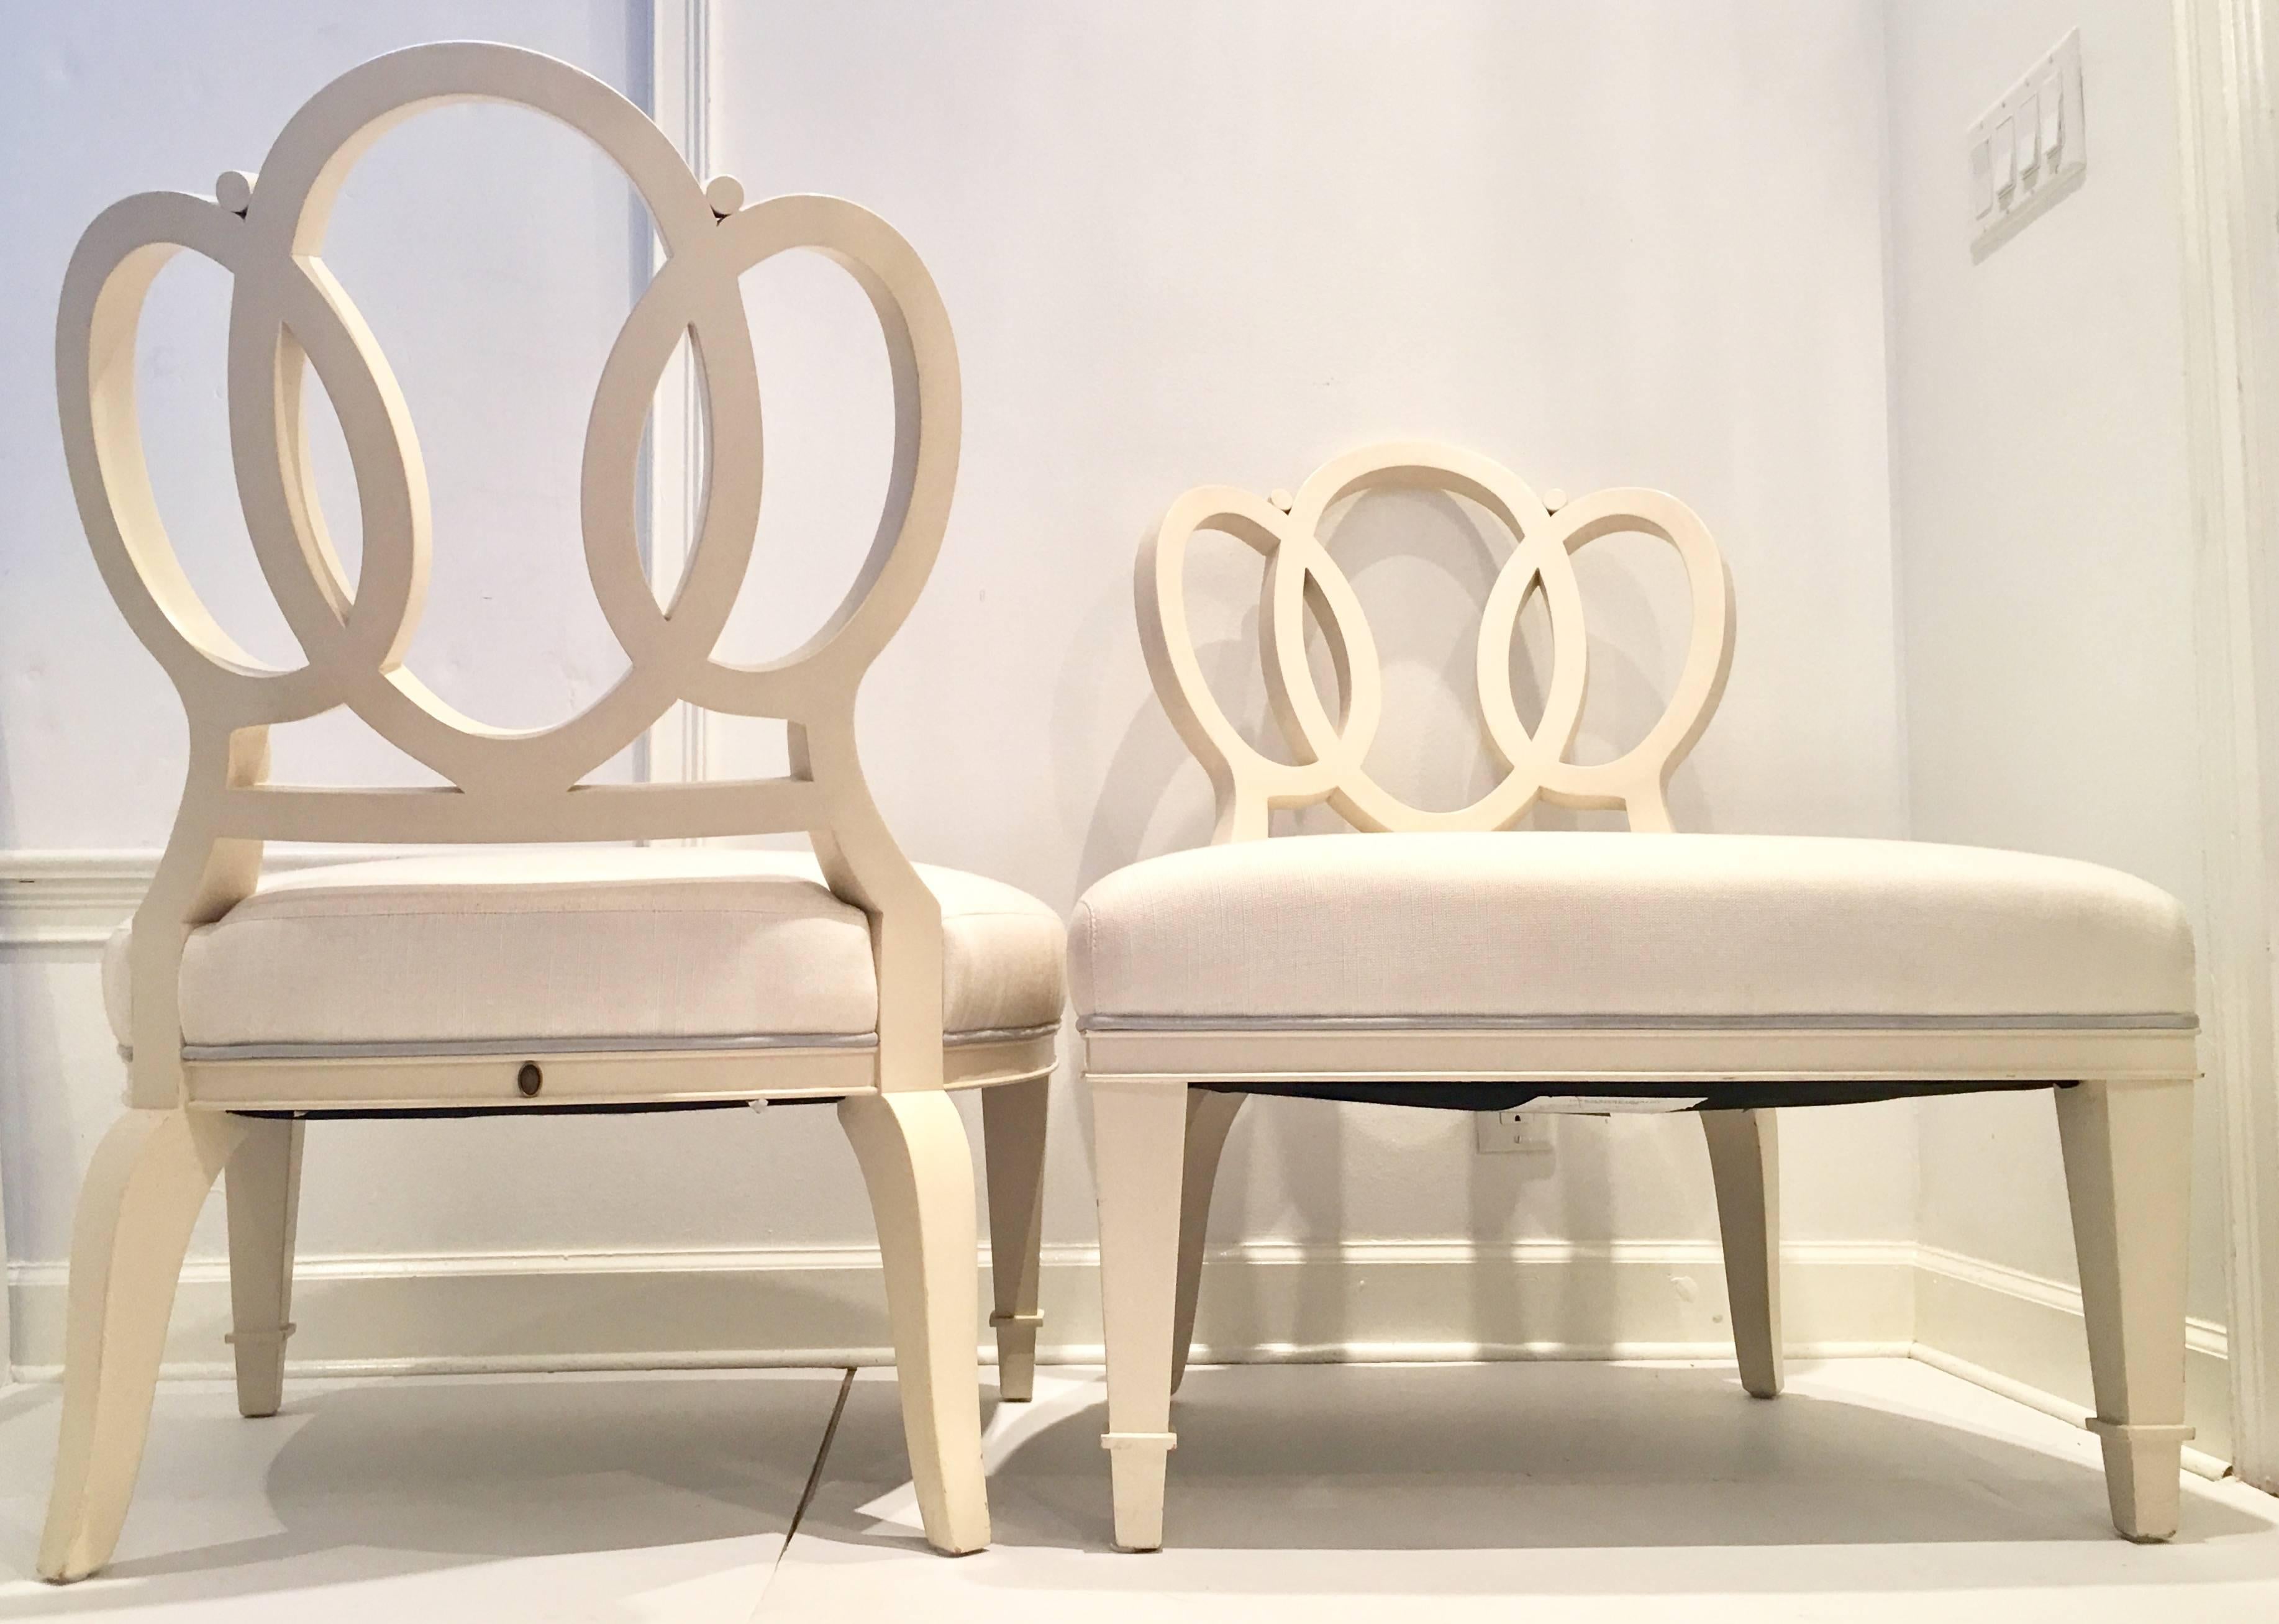 Rare pair of Barbara Barry designed for Henredon "Bracelet Chairs". Made of wood and painted in an off-white semi-gloss finish. Upholstered in white linen blend fabric with a light blue suede welt detail. Each chair is signed on the back